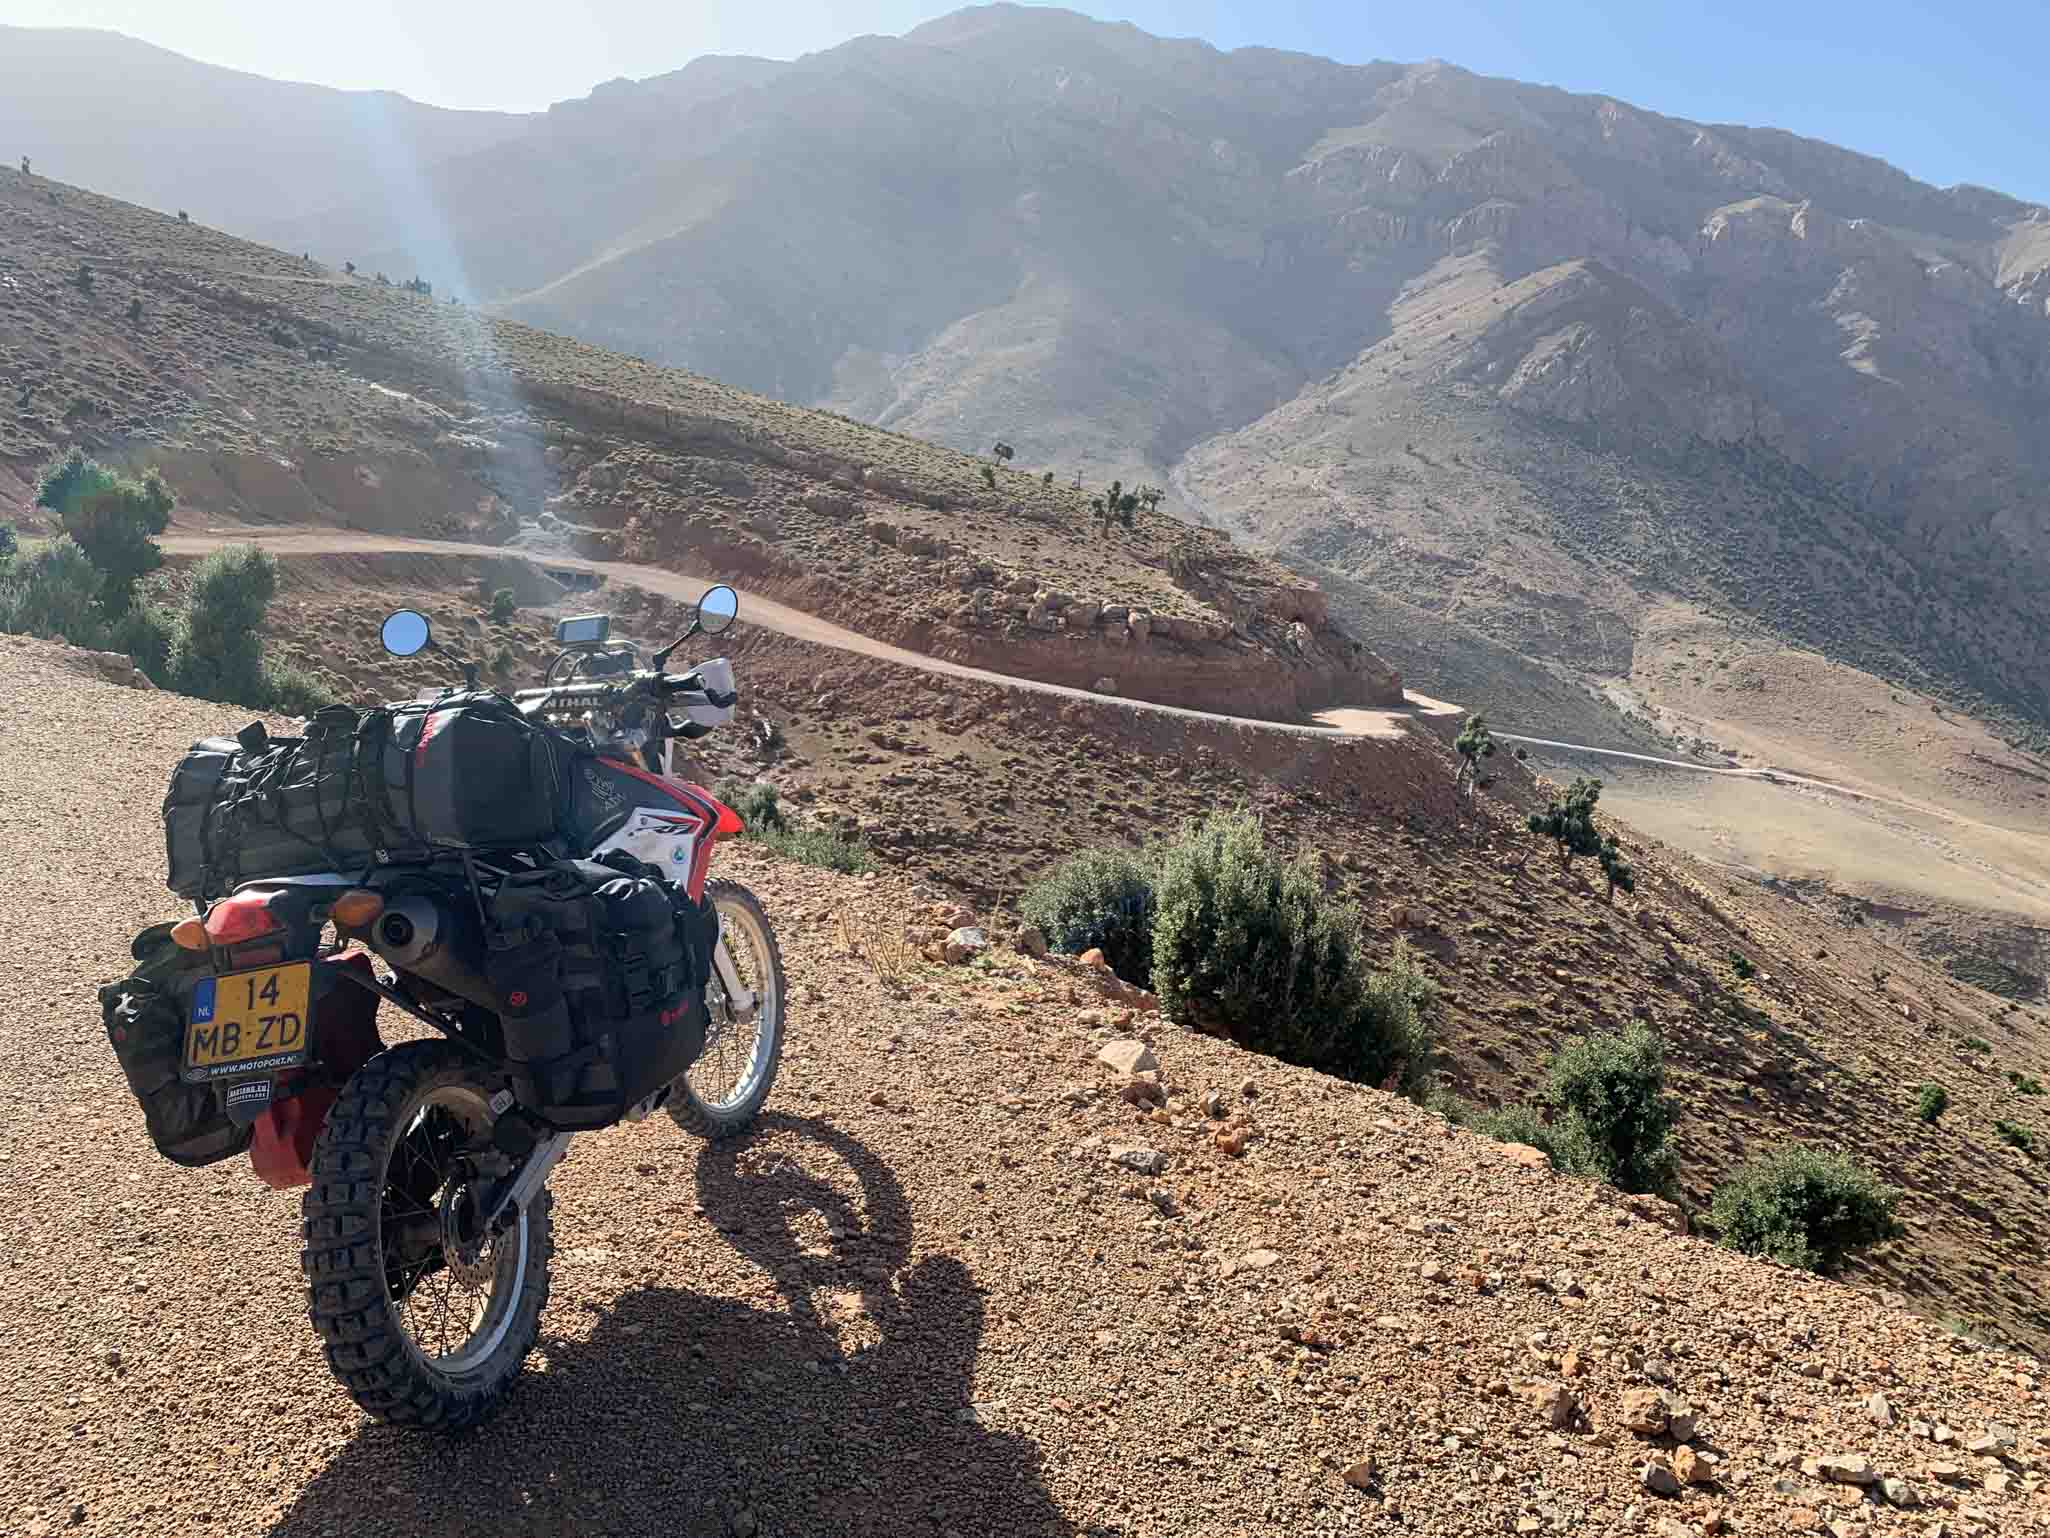 Pure adventure riding heaven for motorcycle overland travellers.